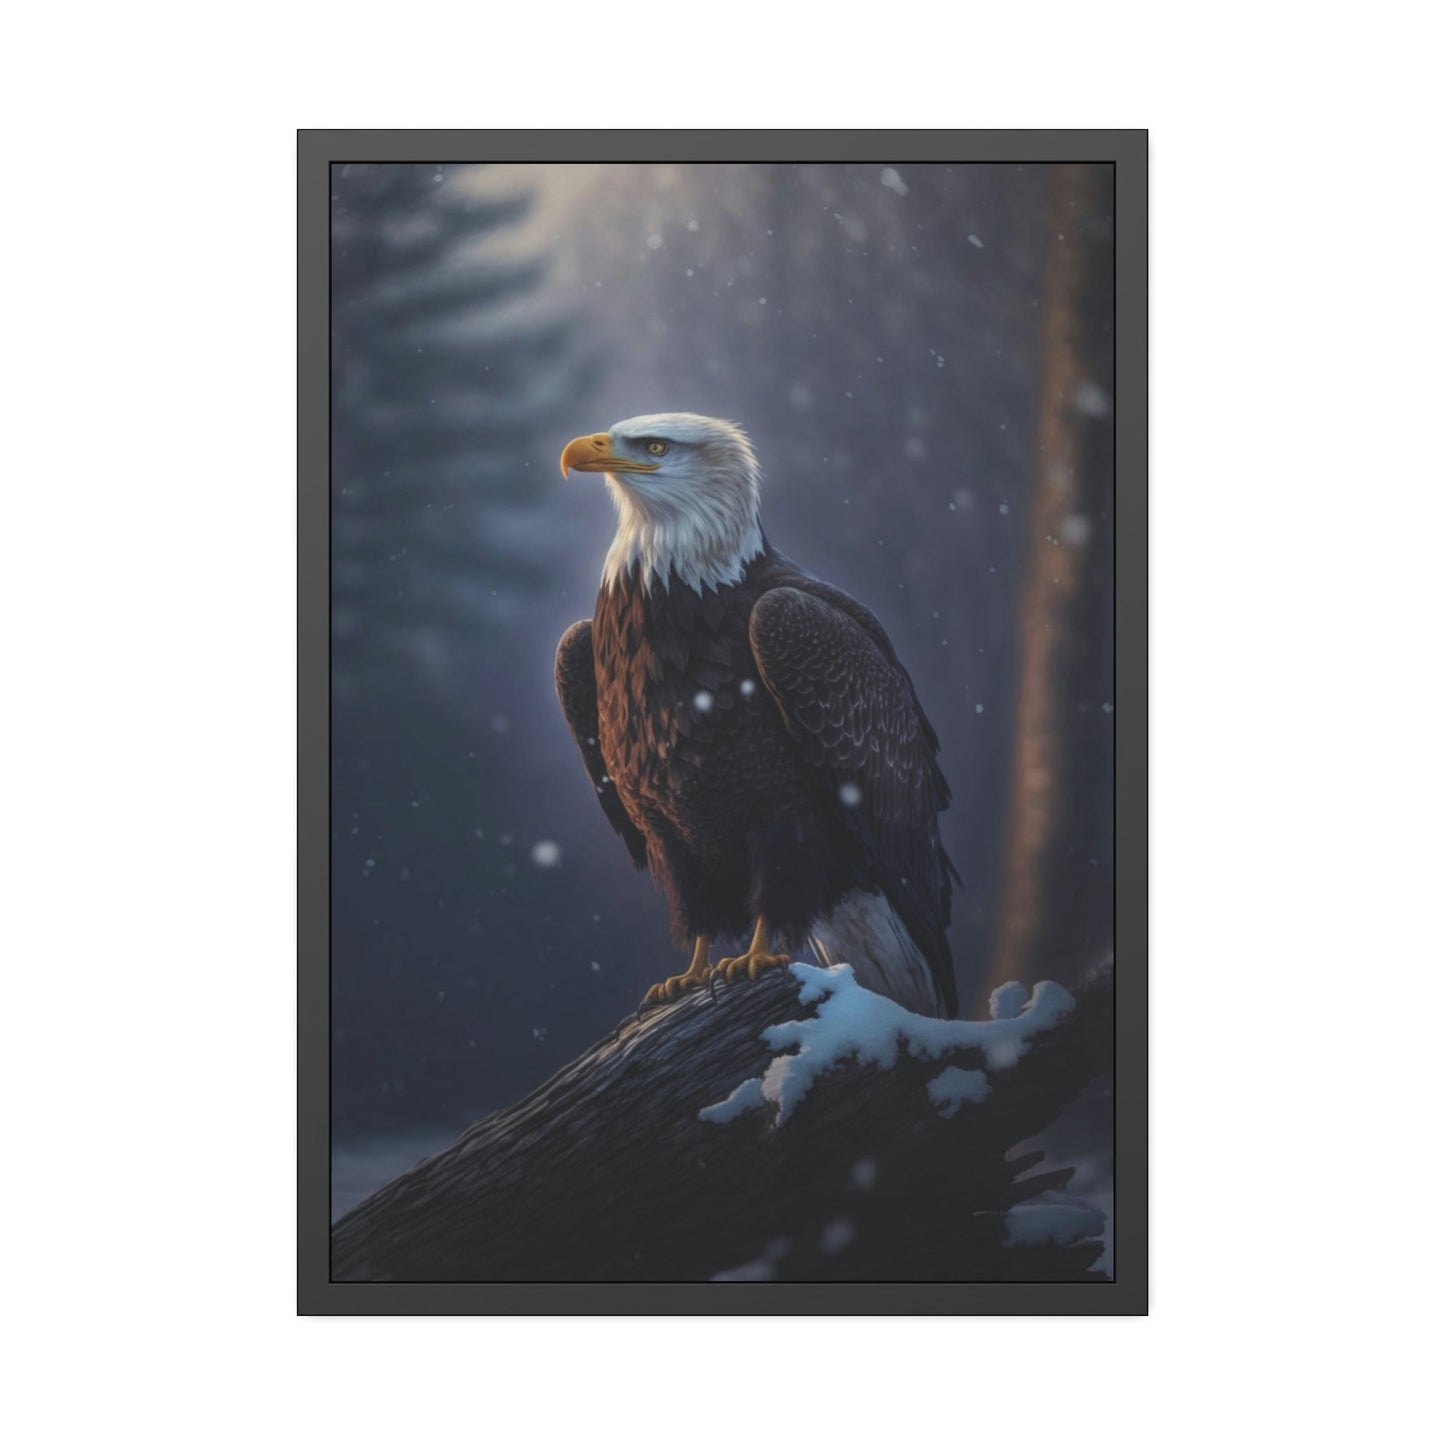 Eagle's Vision: Mesmerizing Print on Natural Canvas, Capturing their Watchful Eyes